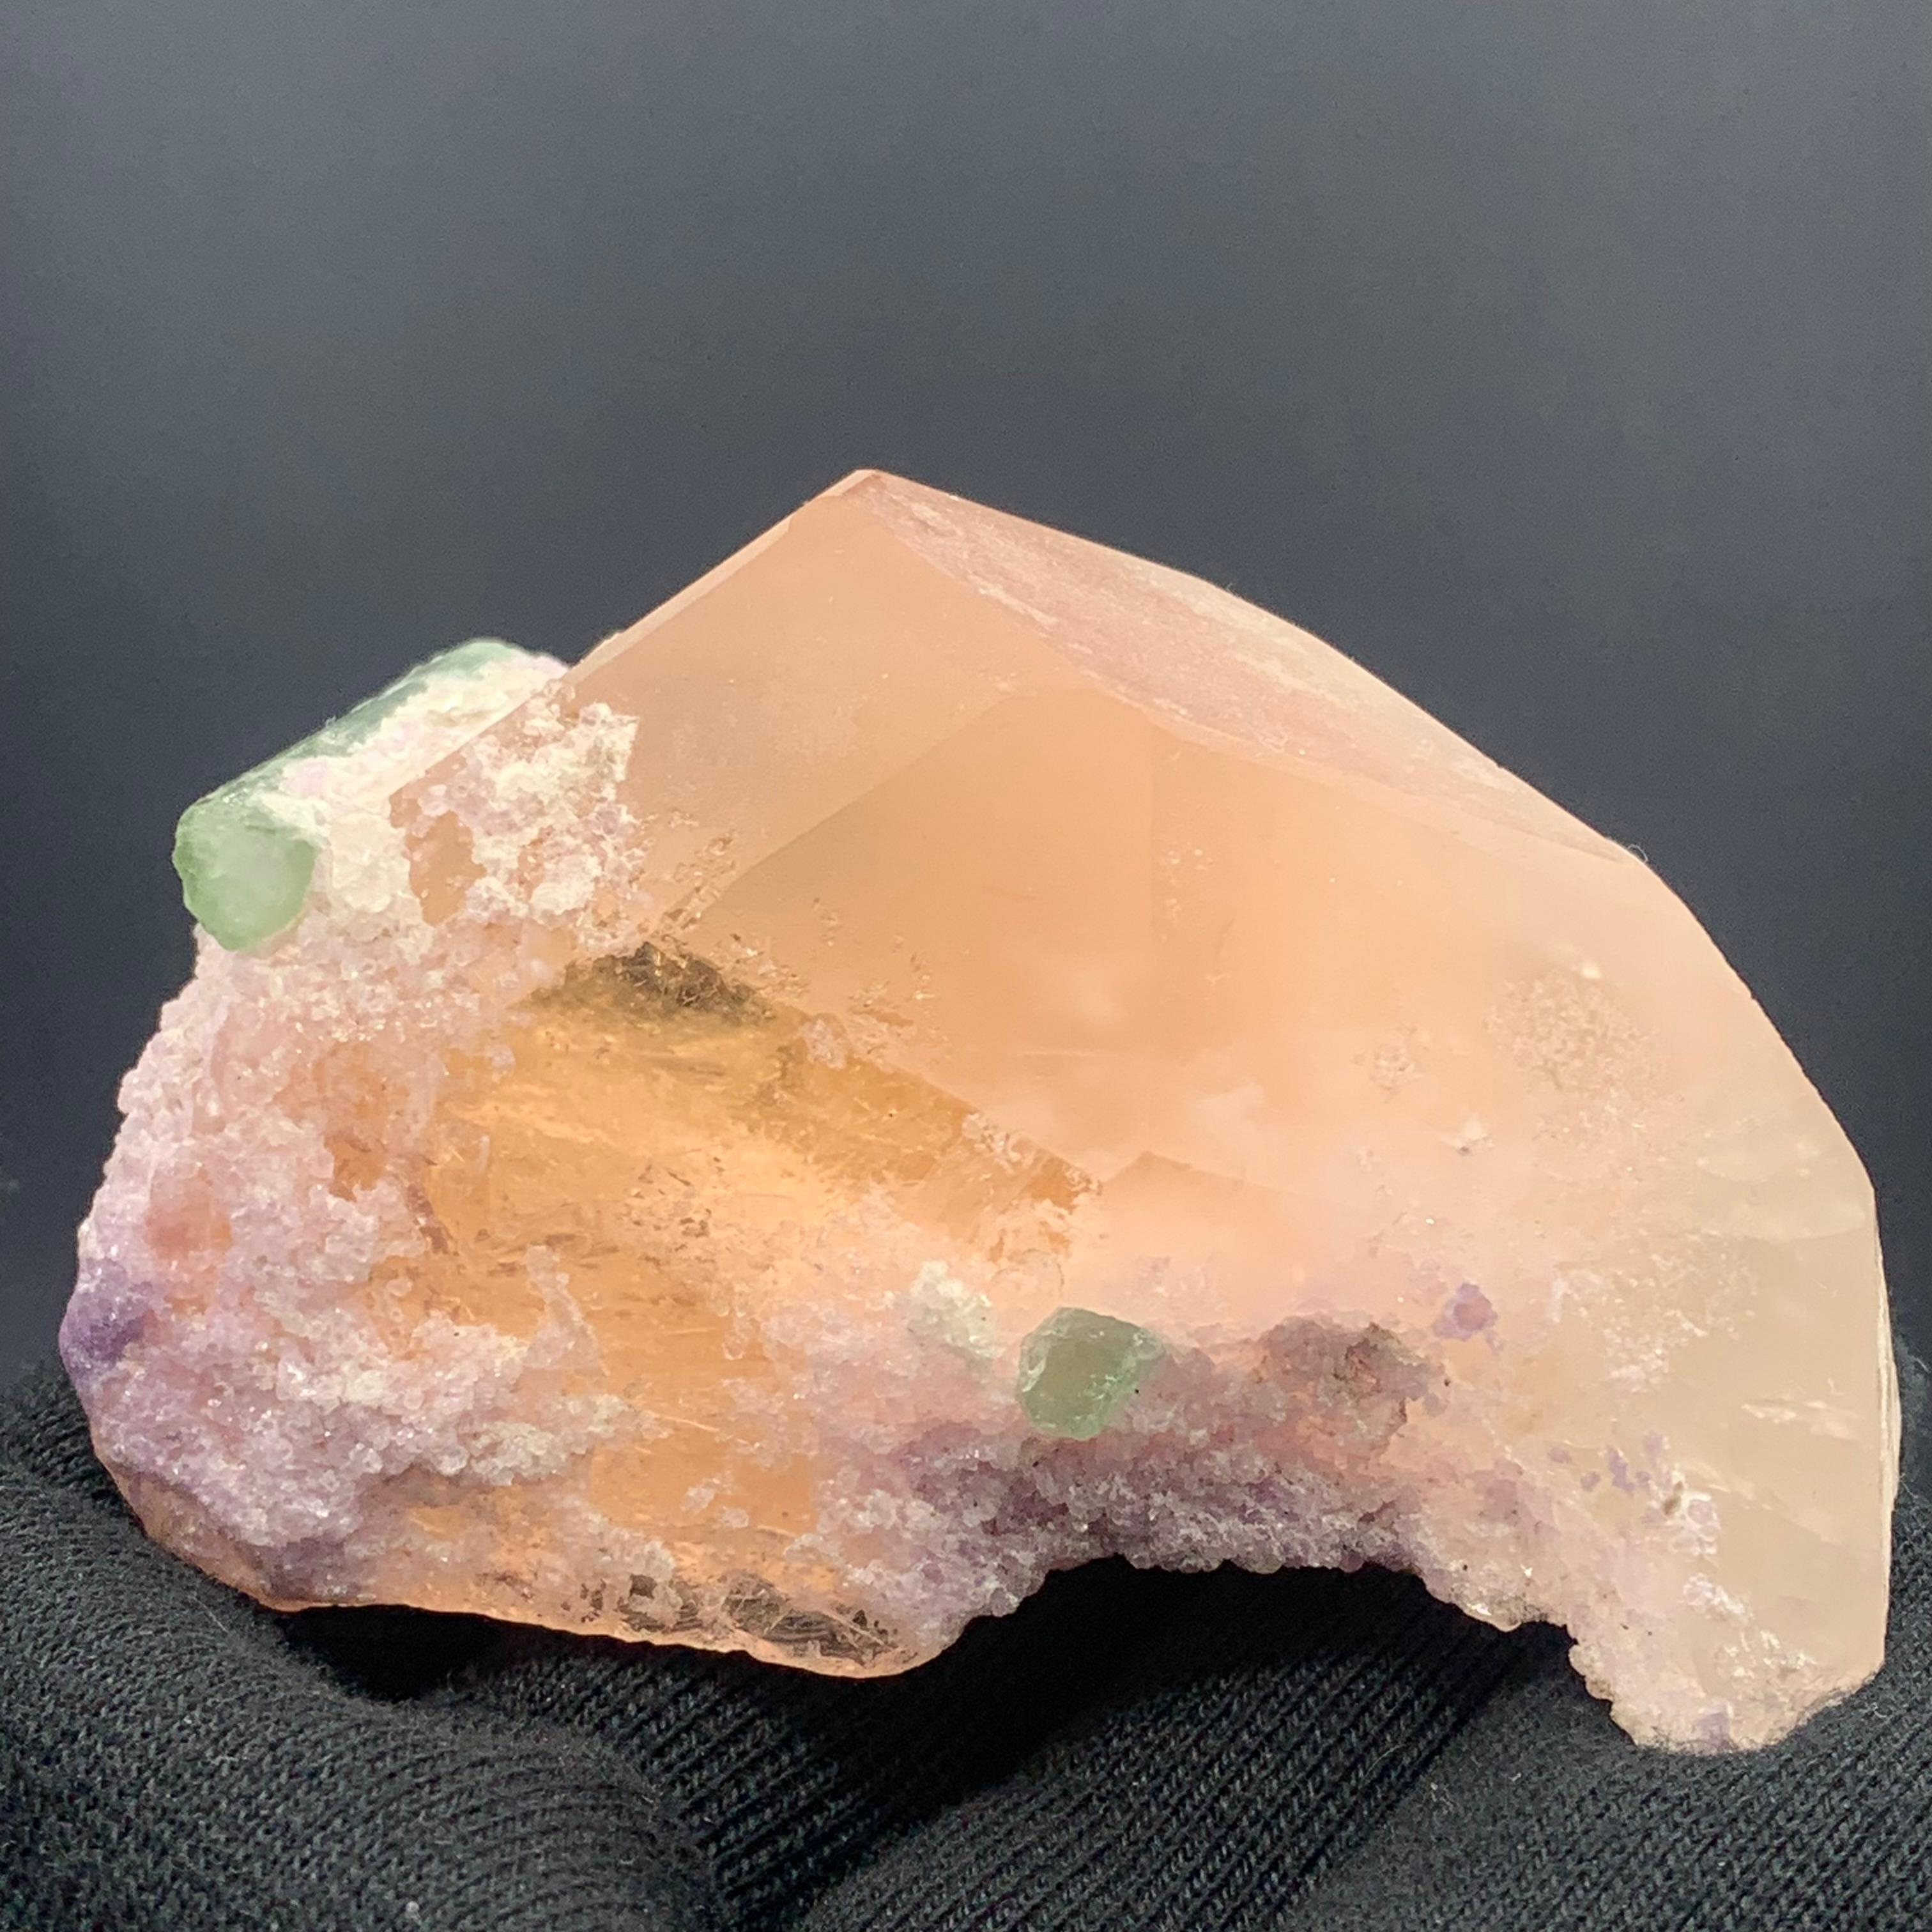 231.5 Gram Morganite Specimen attached With Green Tourmaline And Fluorite 

Weight: 231.5 Gram
Dimension: 4.3 x 8.3 x 5 Cm 
Origin: Kunar, Afghanistan 

With its soft pinkish hue, morganite is often associated with innocence, sweetness, romance and